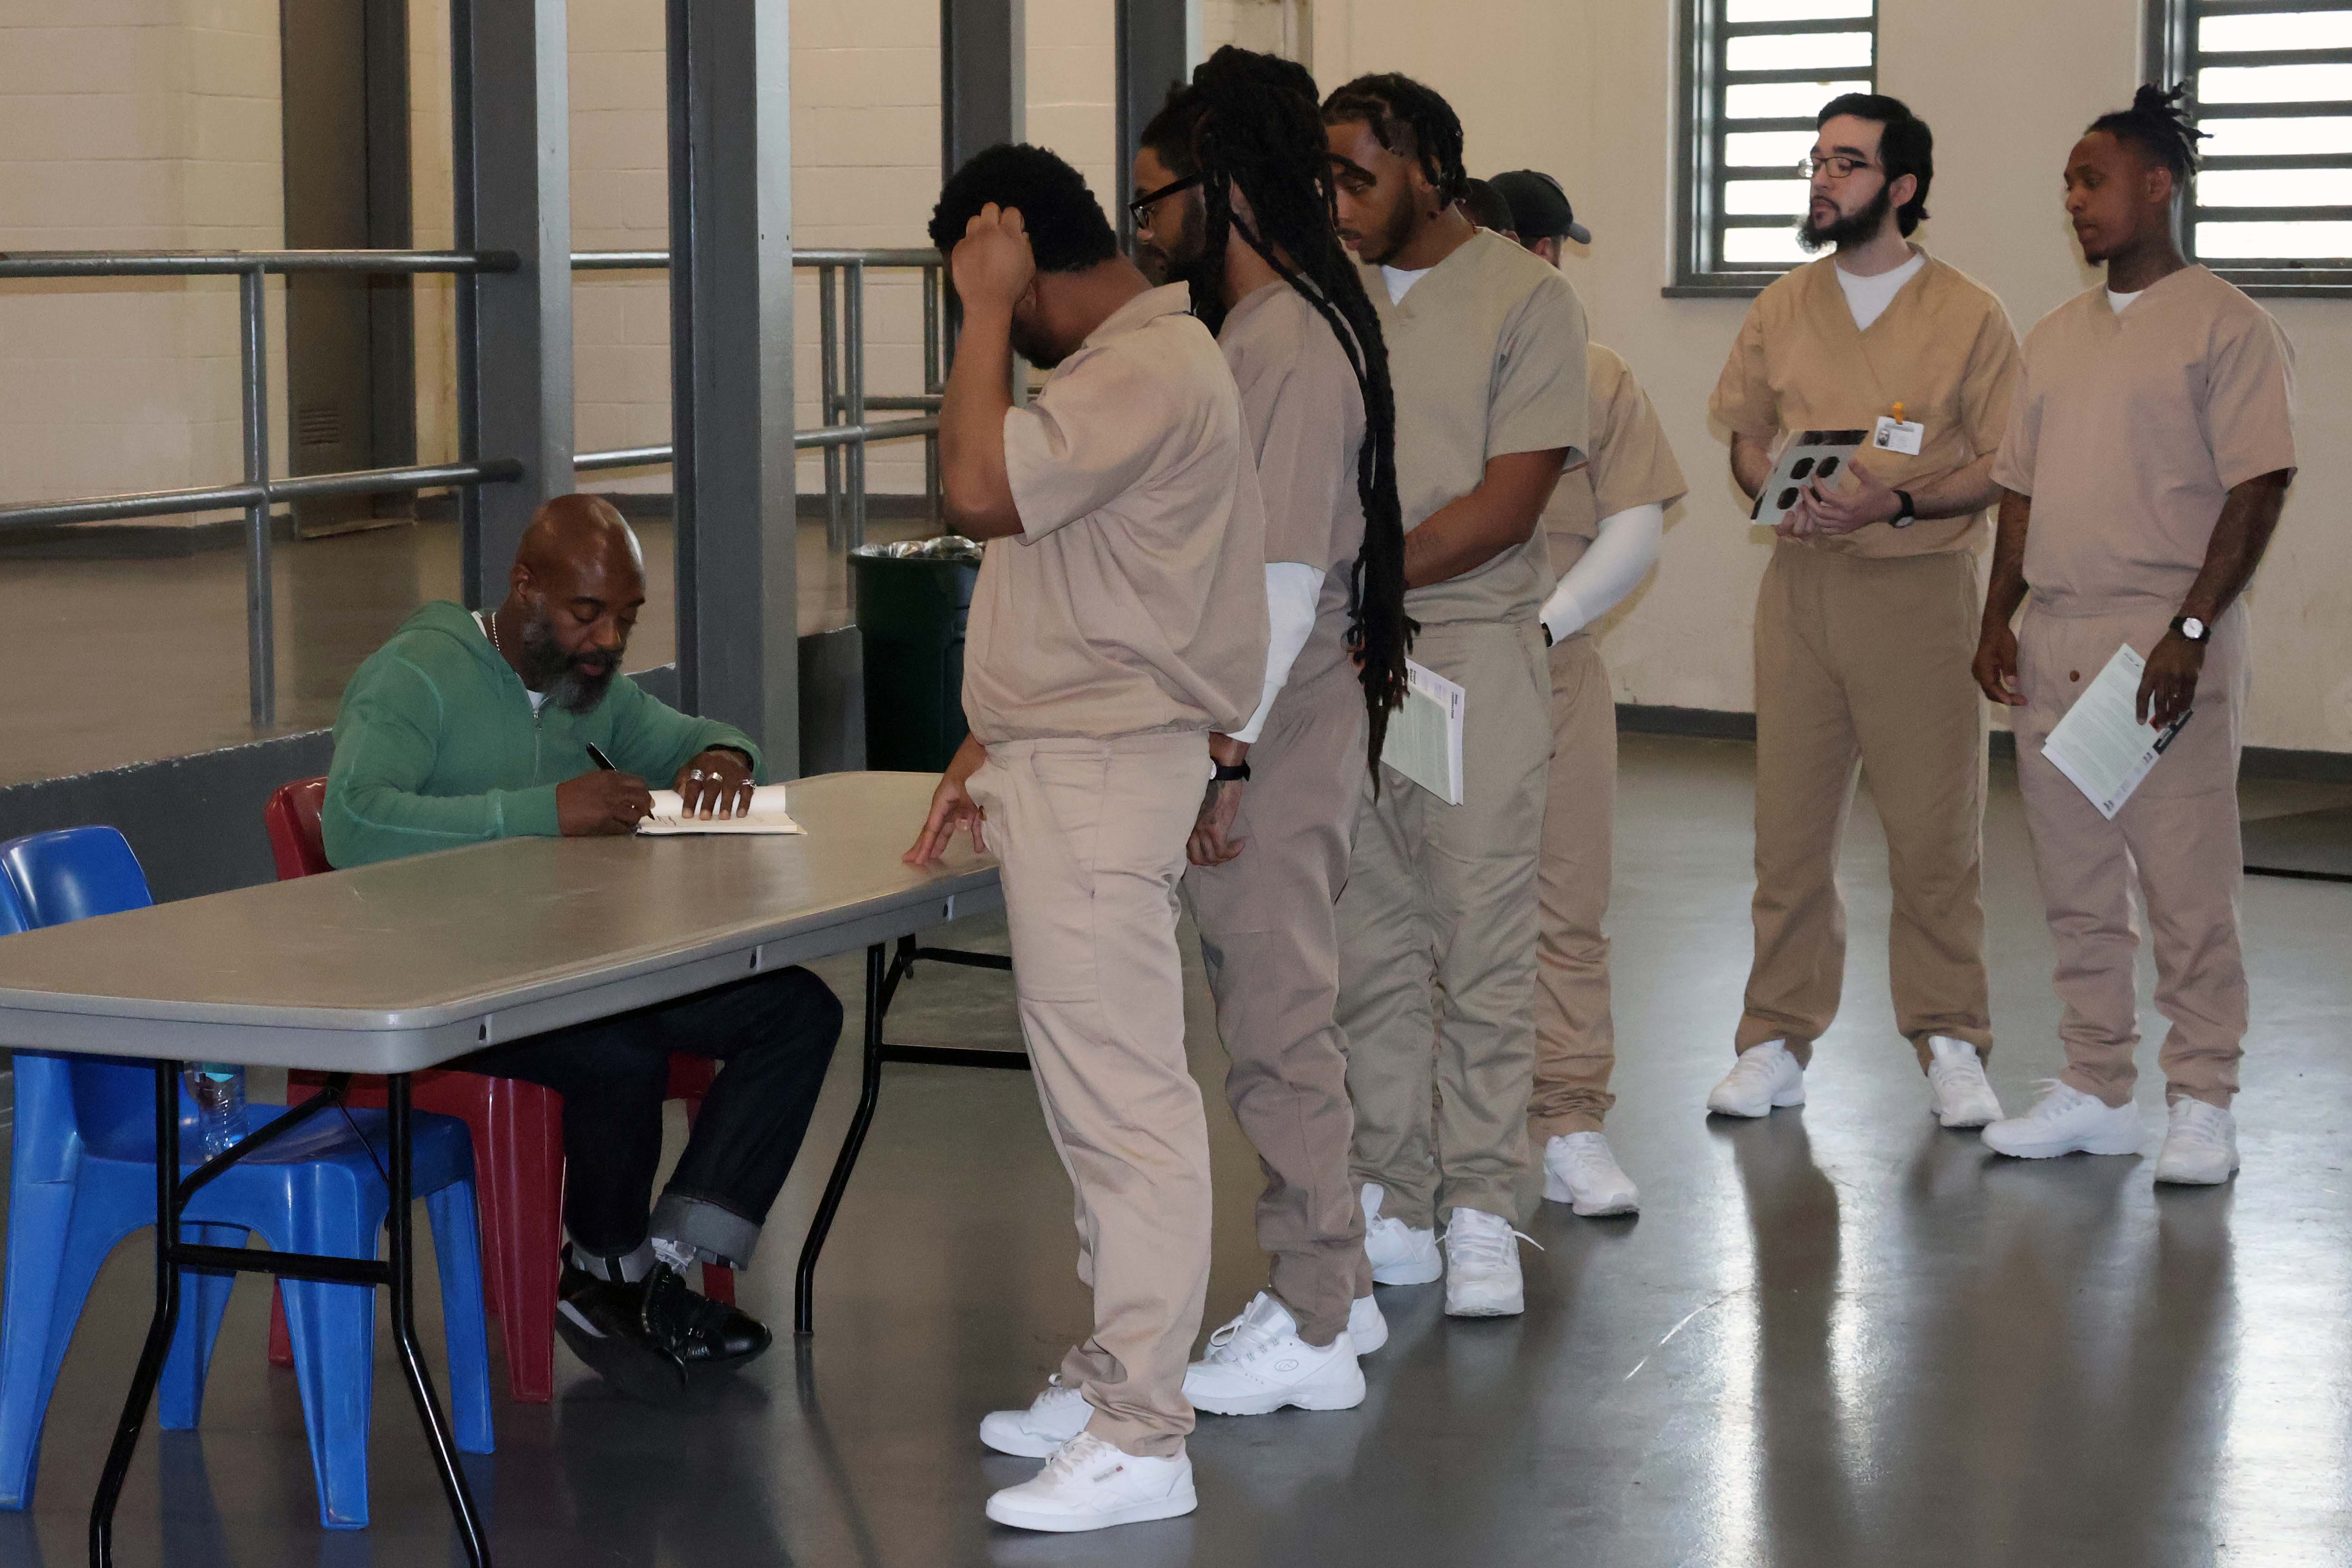 6 men at Garden State Correctional Facility line up to have copies of FELON signed by Freedom Reads Founder & CEO Reginald Dwayne Betts, who sits at a table.